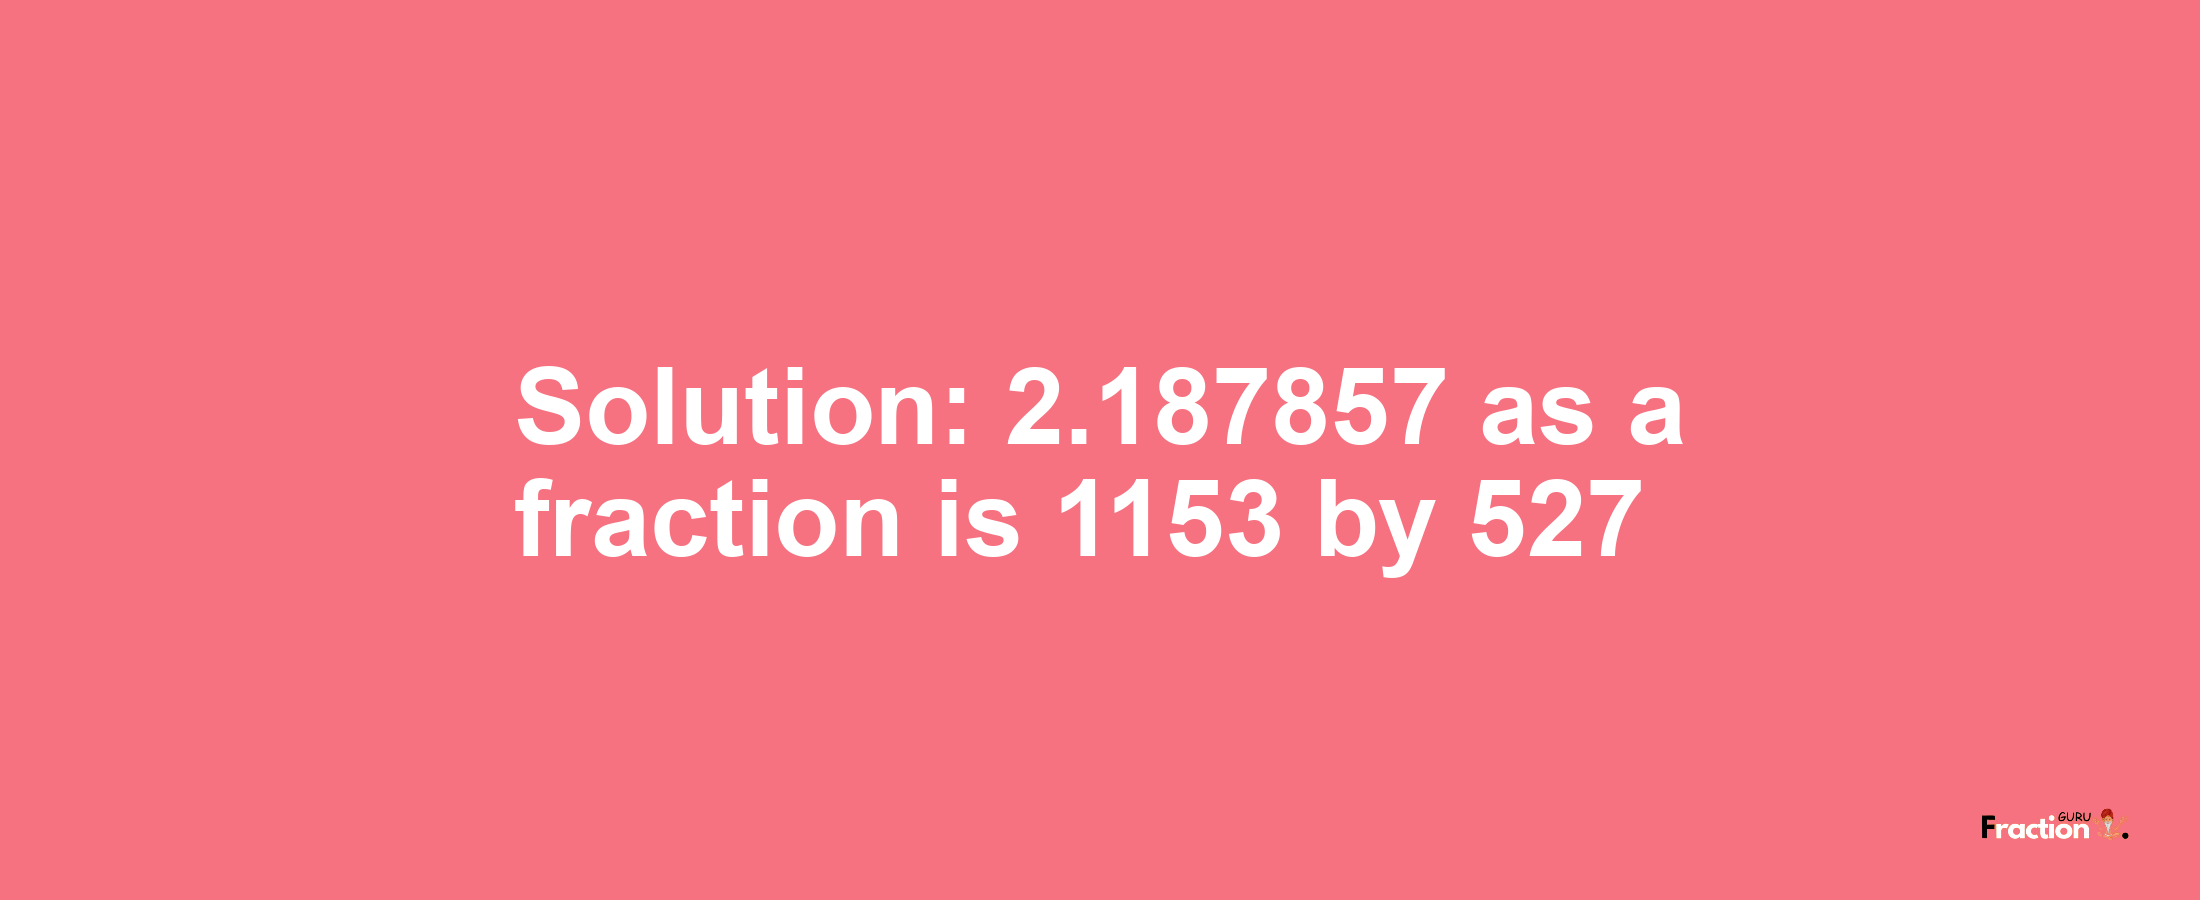 Solution:2.187857 as a fraction is 1153/527